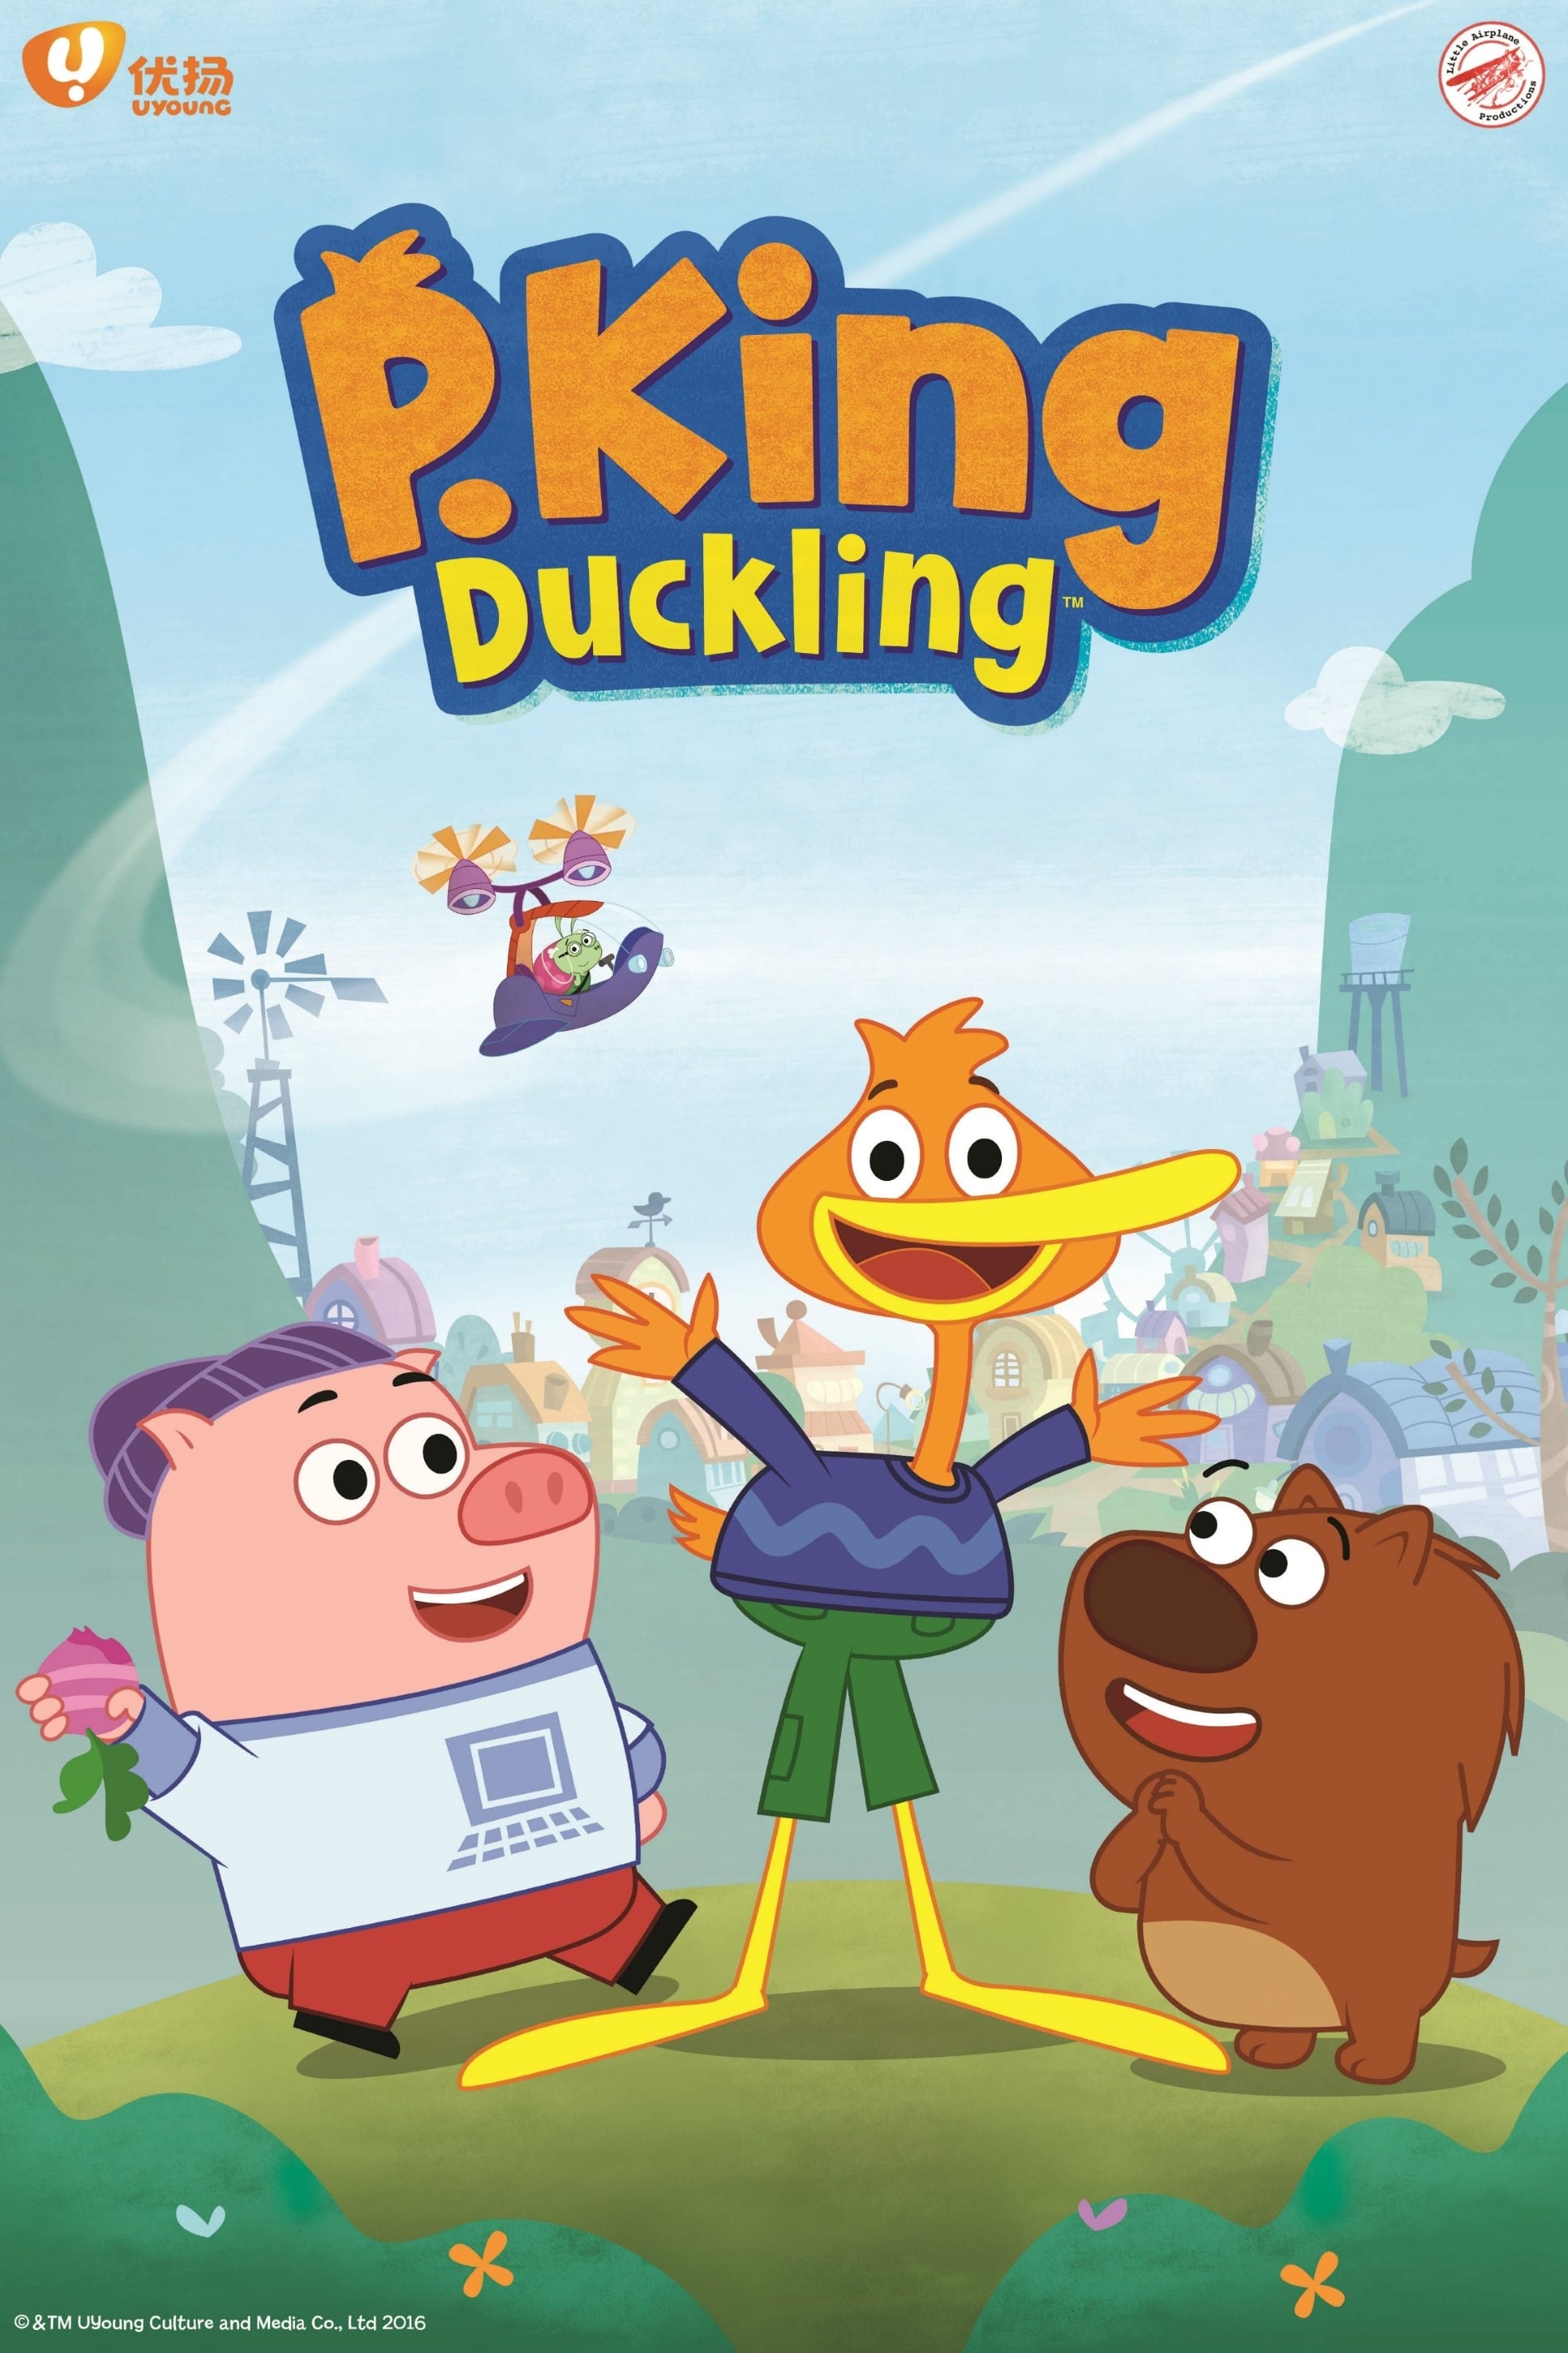 P. KING DUCKLING